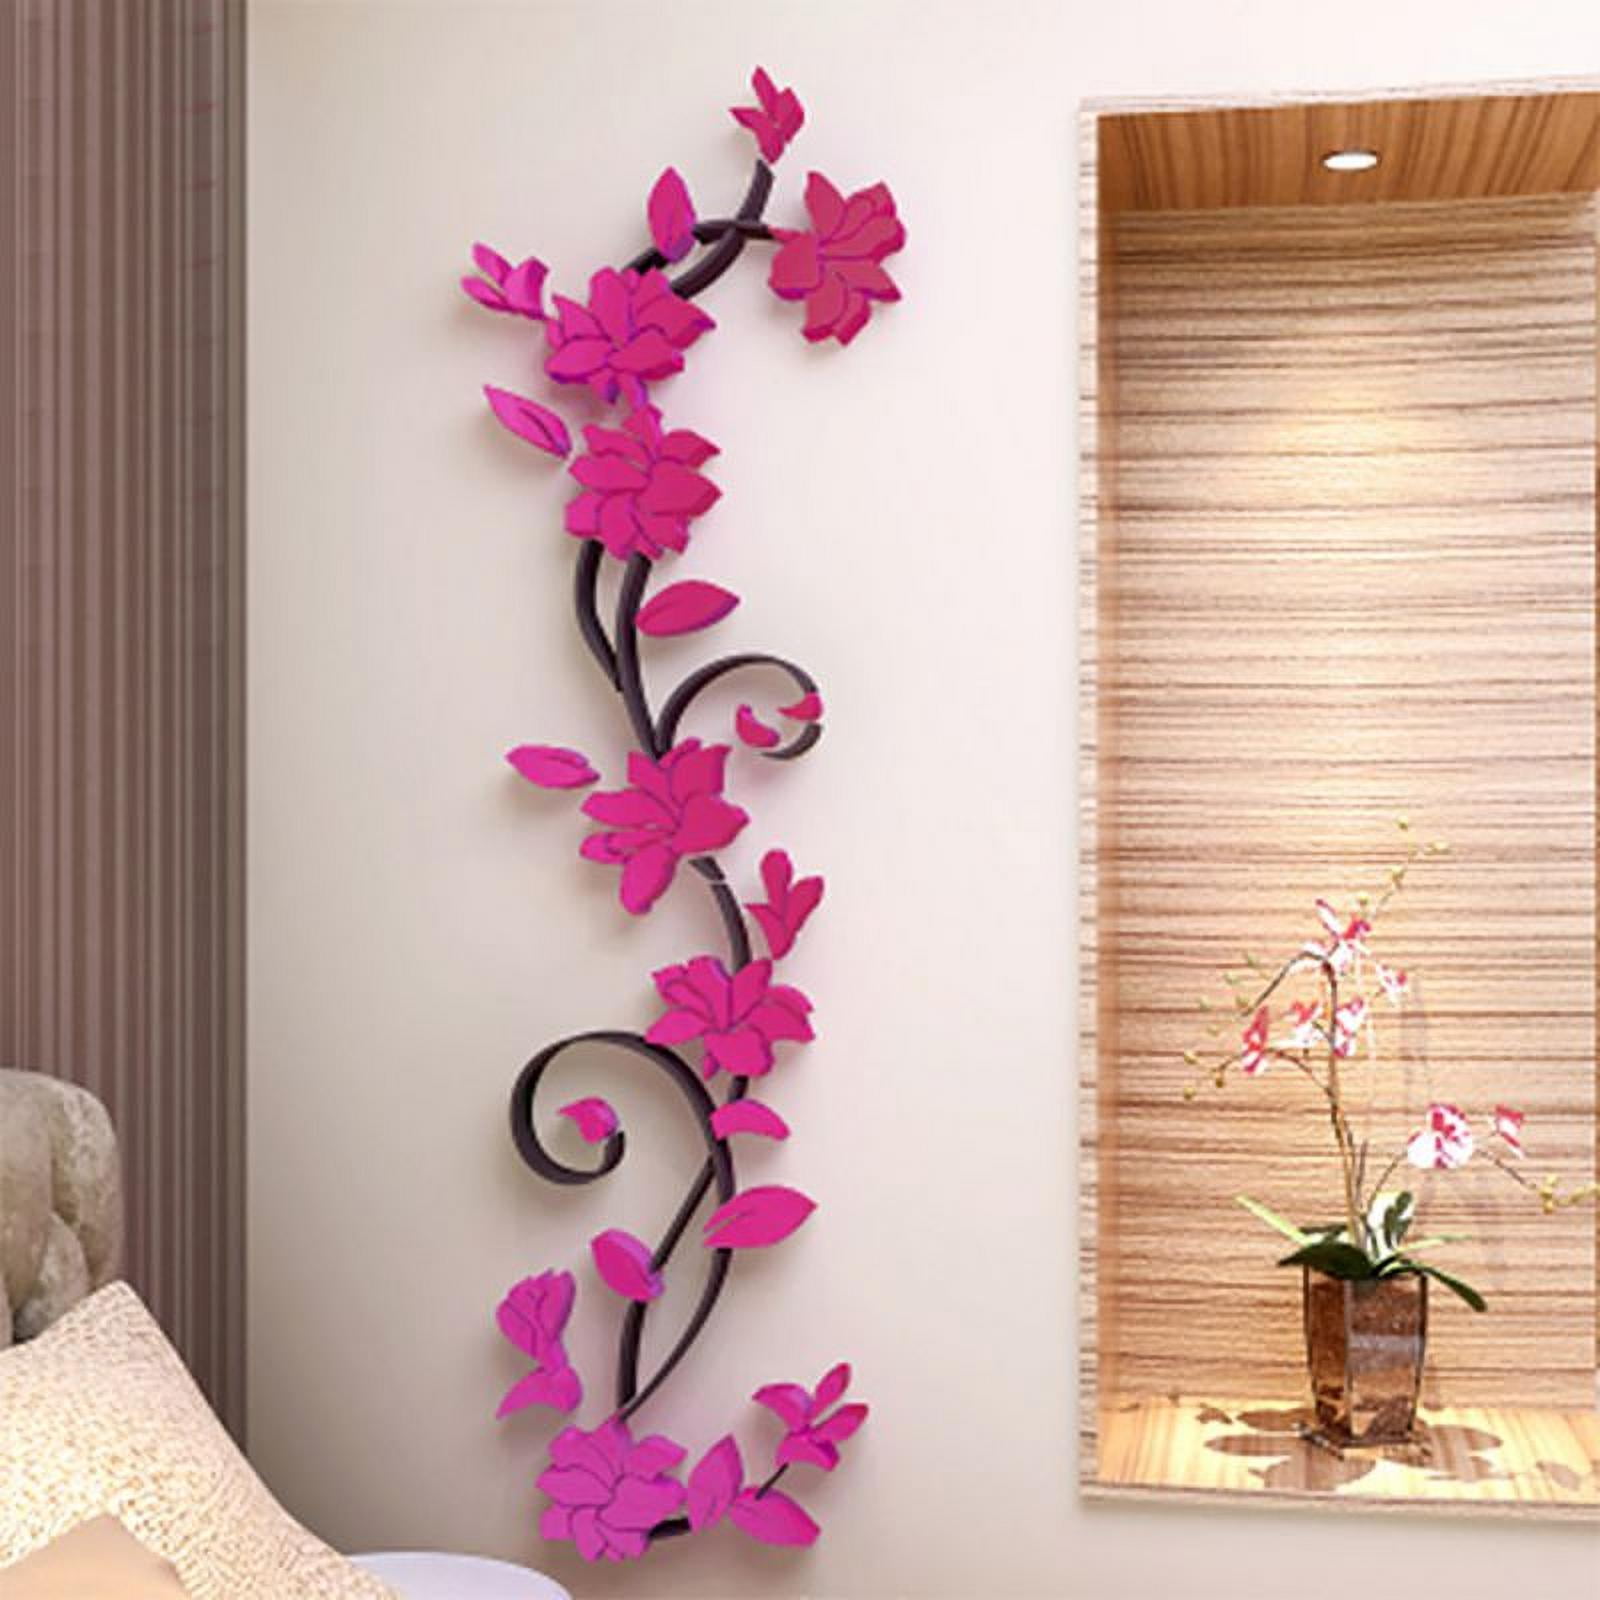 Details about   Acrylic Wall Mirror Stickers Tree Art Mural Decal Home House Ornament Removable